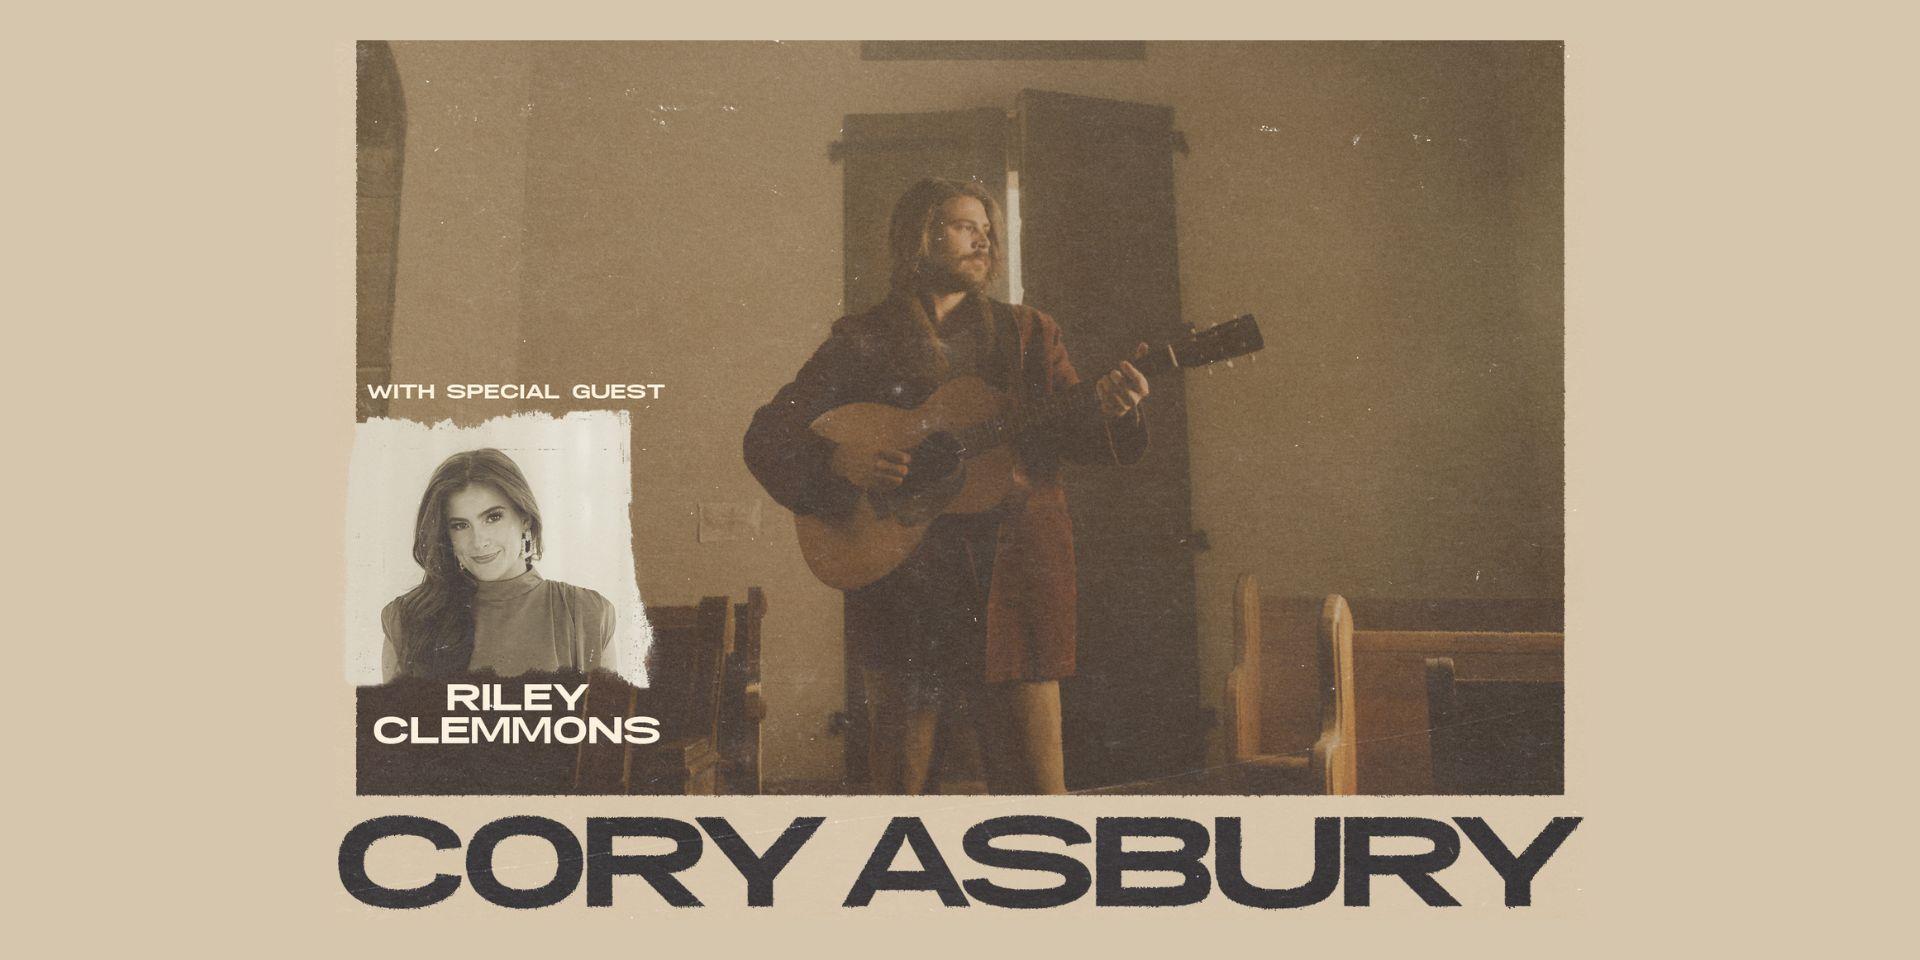 Cory Asbury: The Pioneer Tour with Special Guest Riley Clemmons